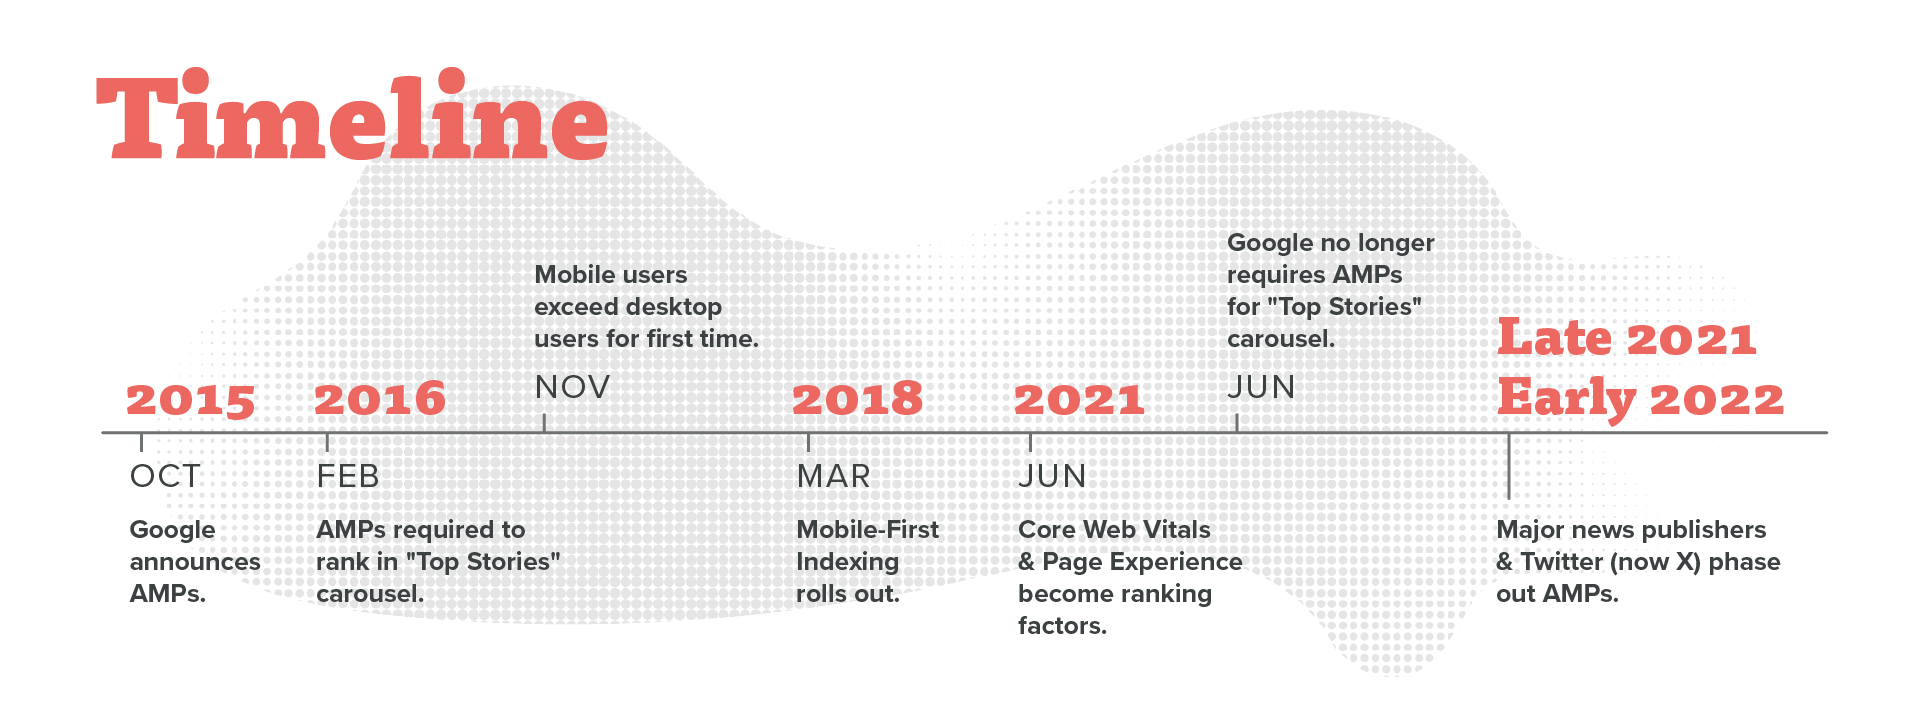 Graphic that tracks the history of Google's accelerated mobile pages from the announcement in 2015 to their slow decline in early 2022